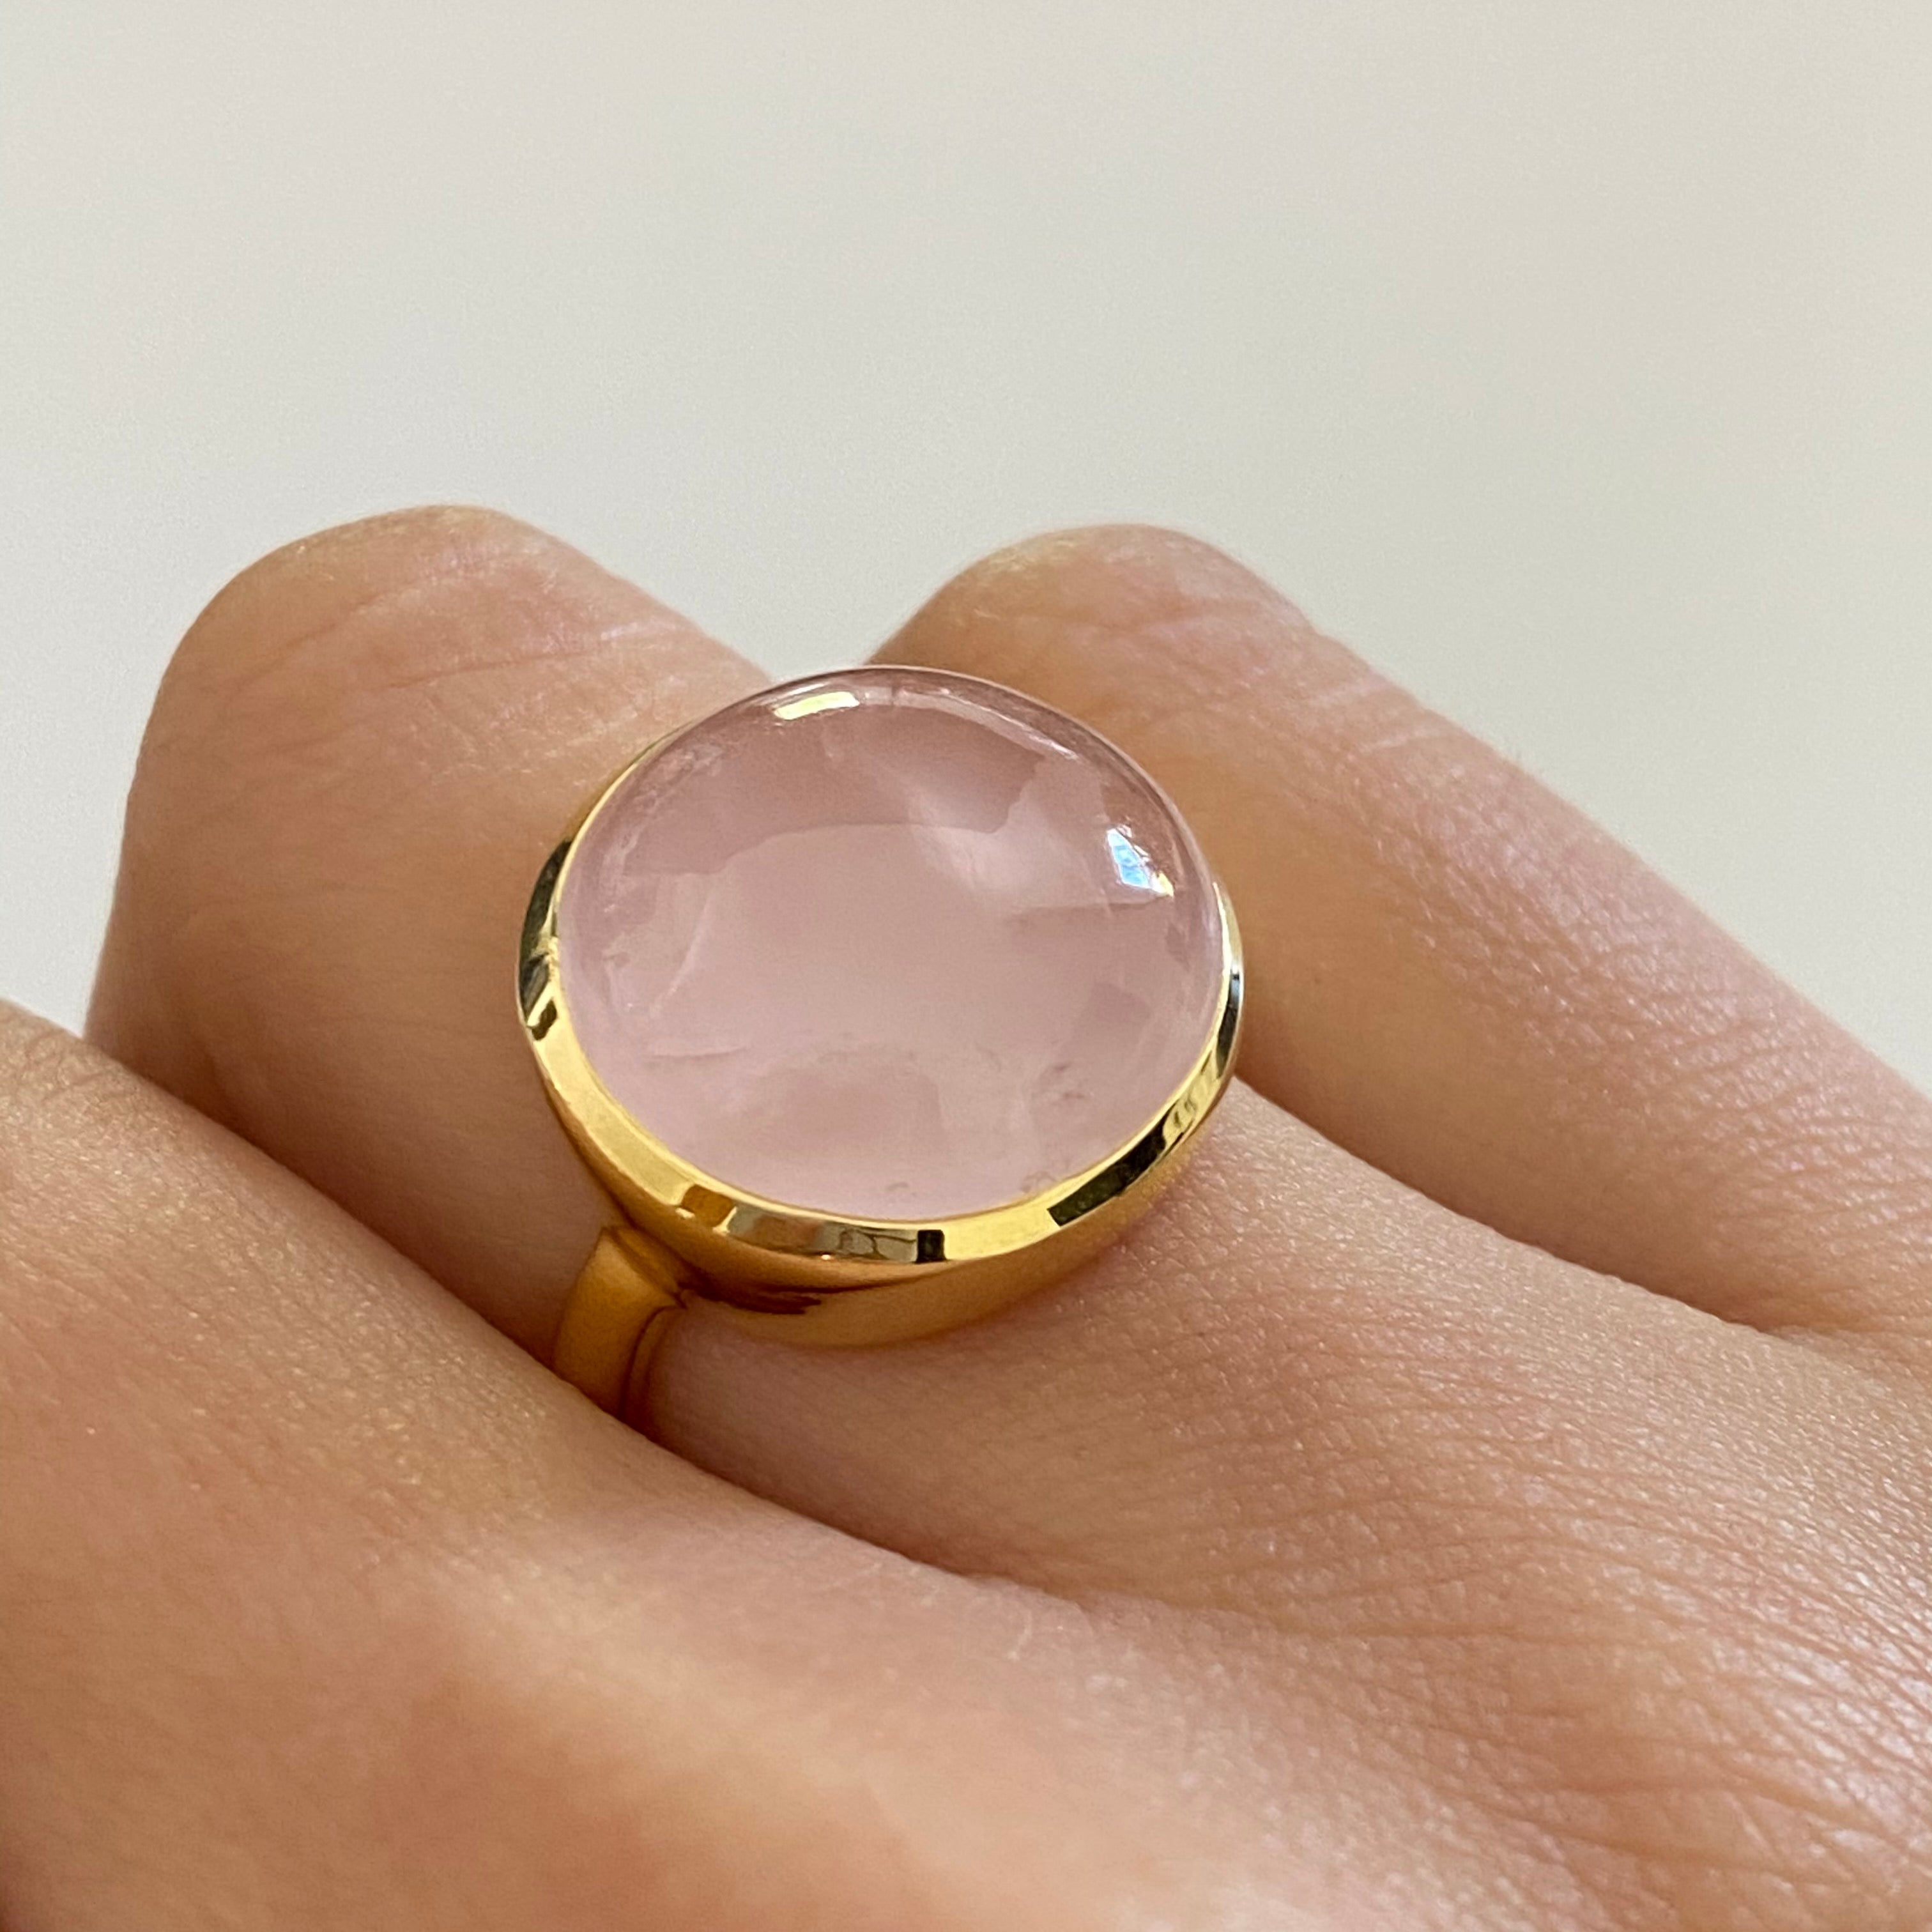 Cabochon Round Cut Natural Gemstone Gold Plated Sterling Silver Ring - Rose Quartz